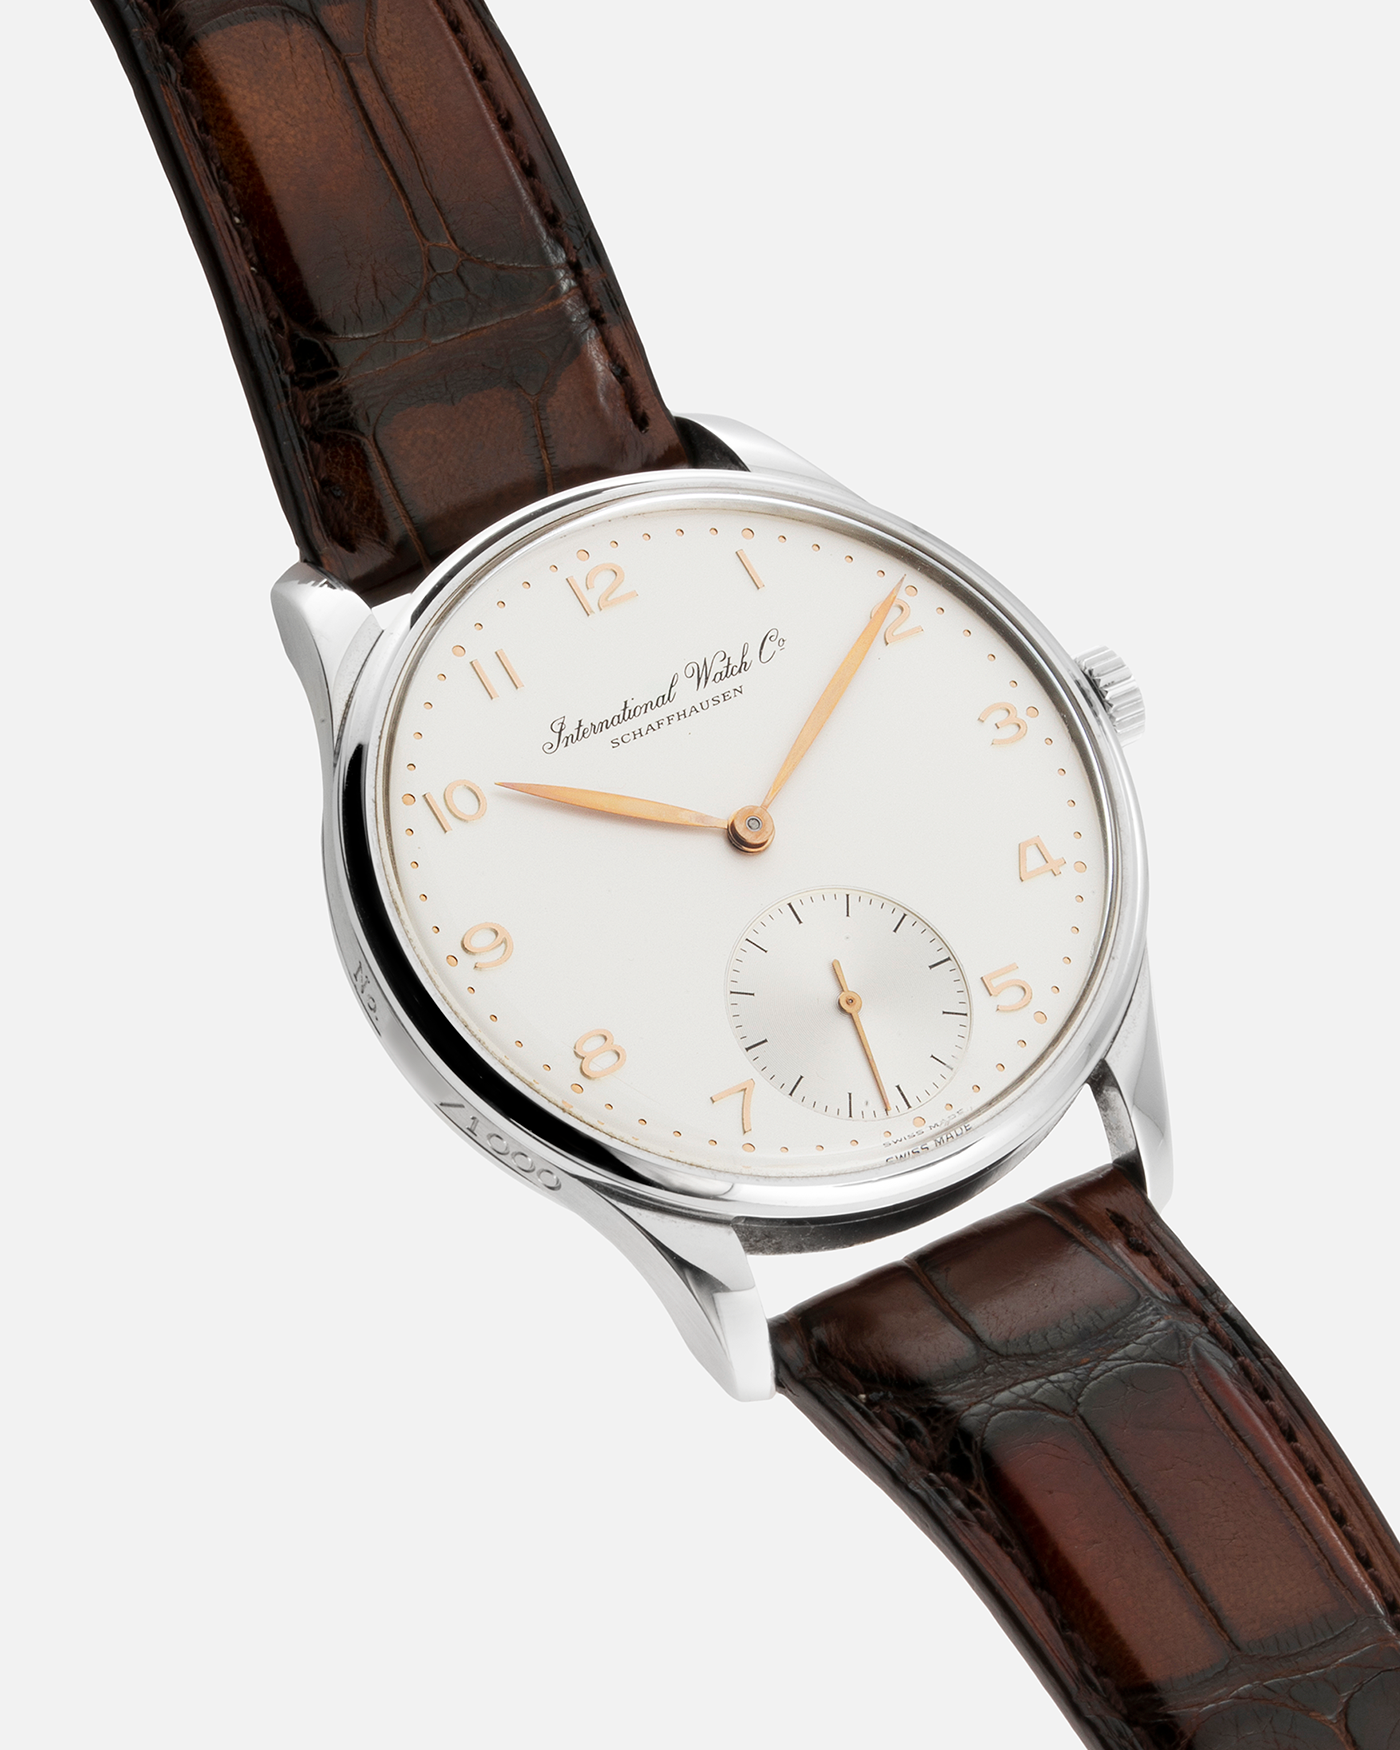 Brand: IWC  Year: 1993 Model: Portugieser 125th Anniversary Jubilee Ref. 5441 Material: Stainless Steel Movement: In-House Cal. 9828, Manual-Wind Case Diameter: 42mm  Bracelet/Strap: IWC Brown Crocodile Leather Strap with Signed Stainless Steel Tang Buckle